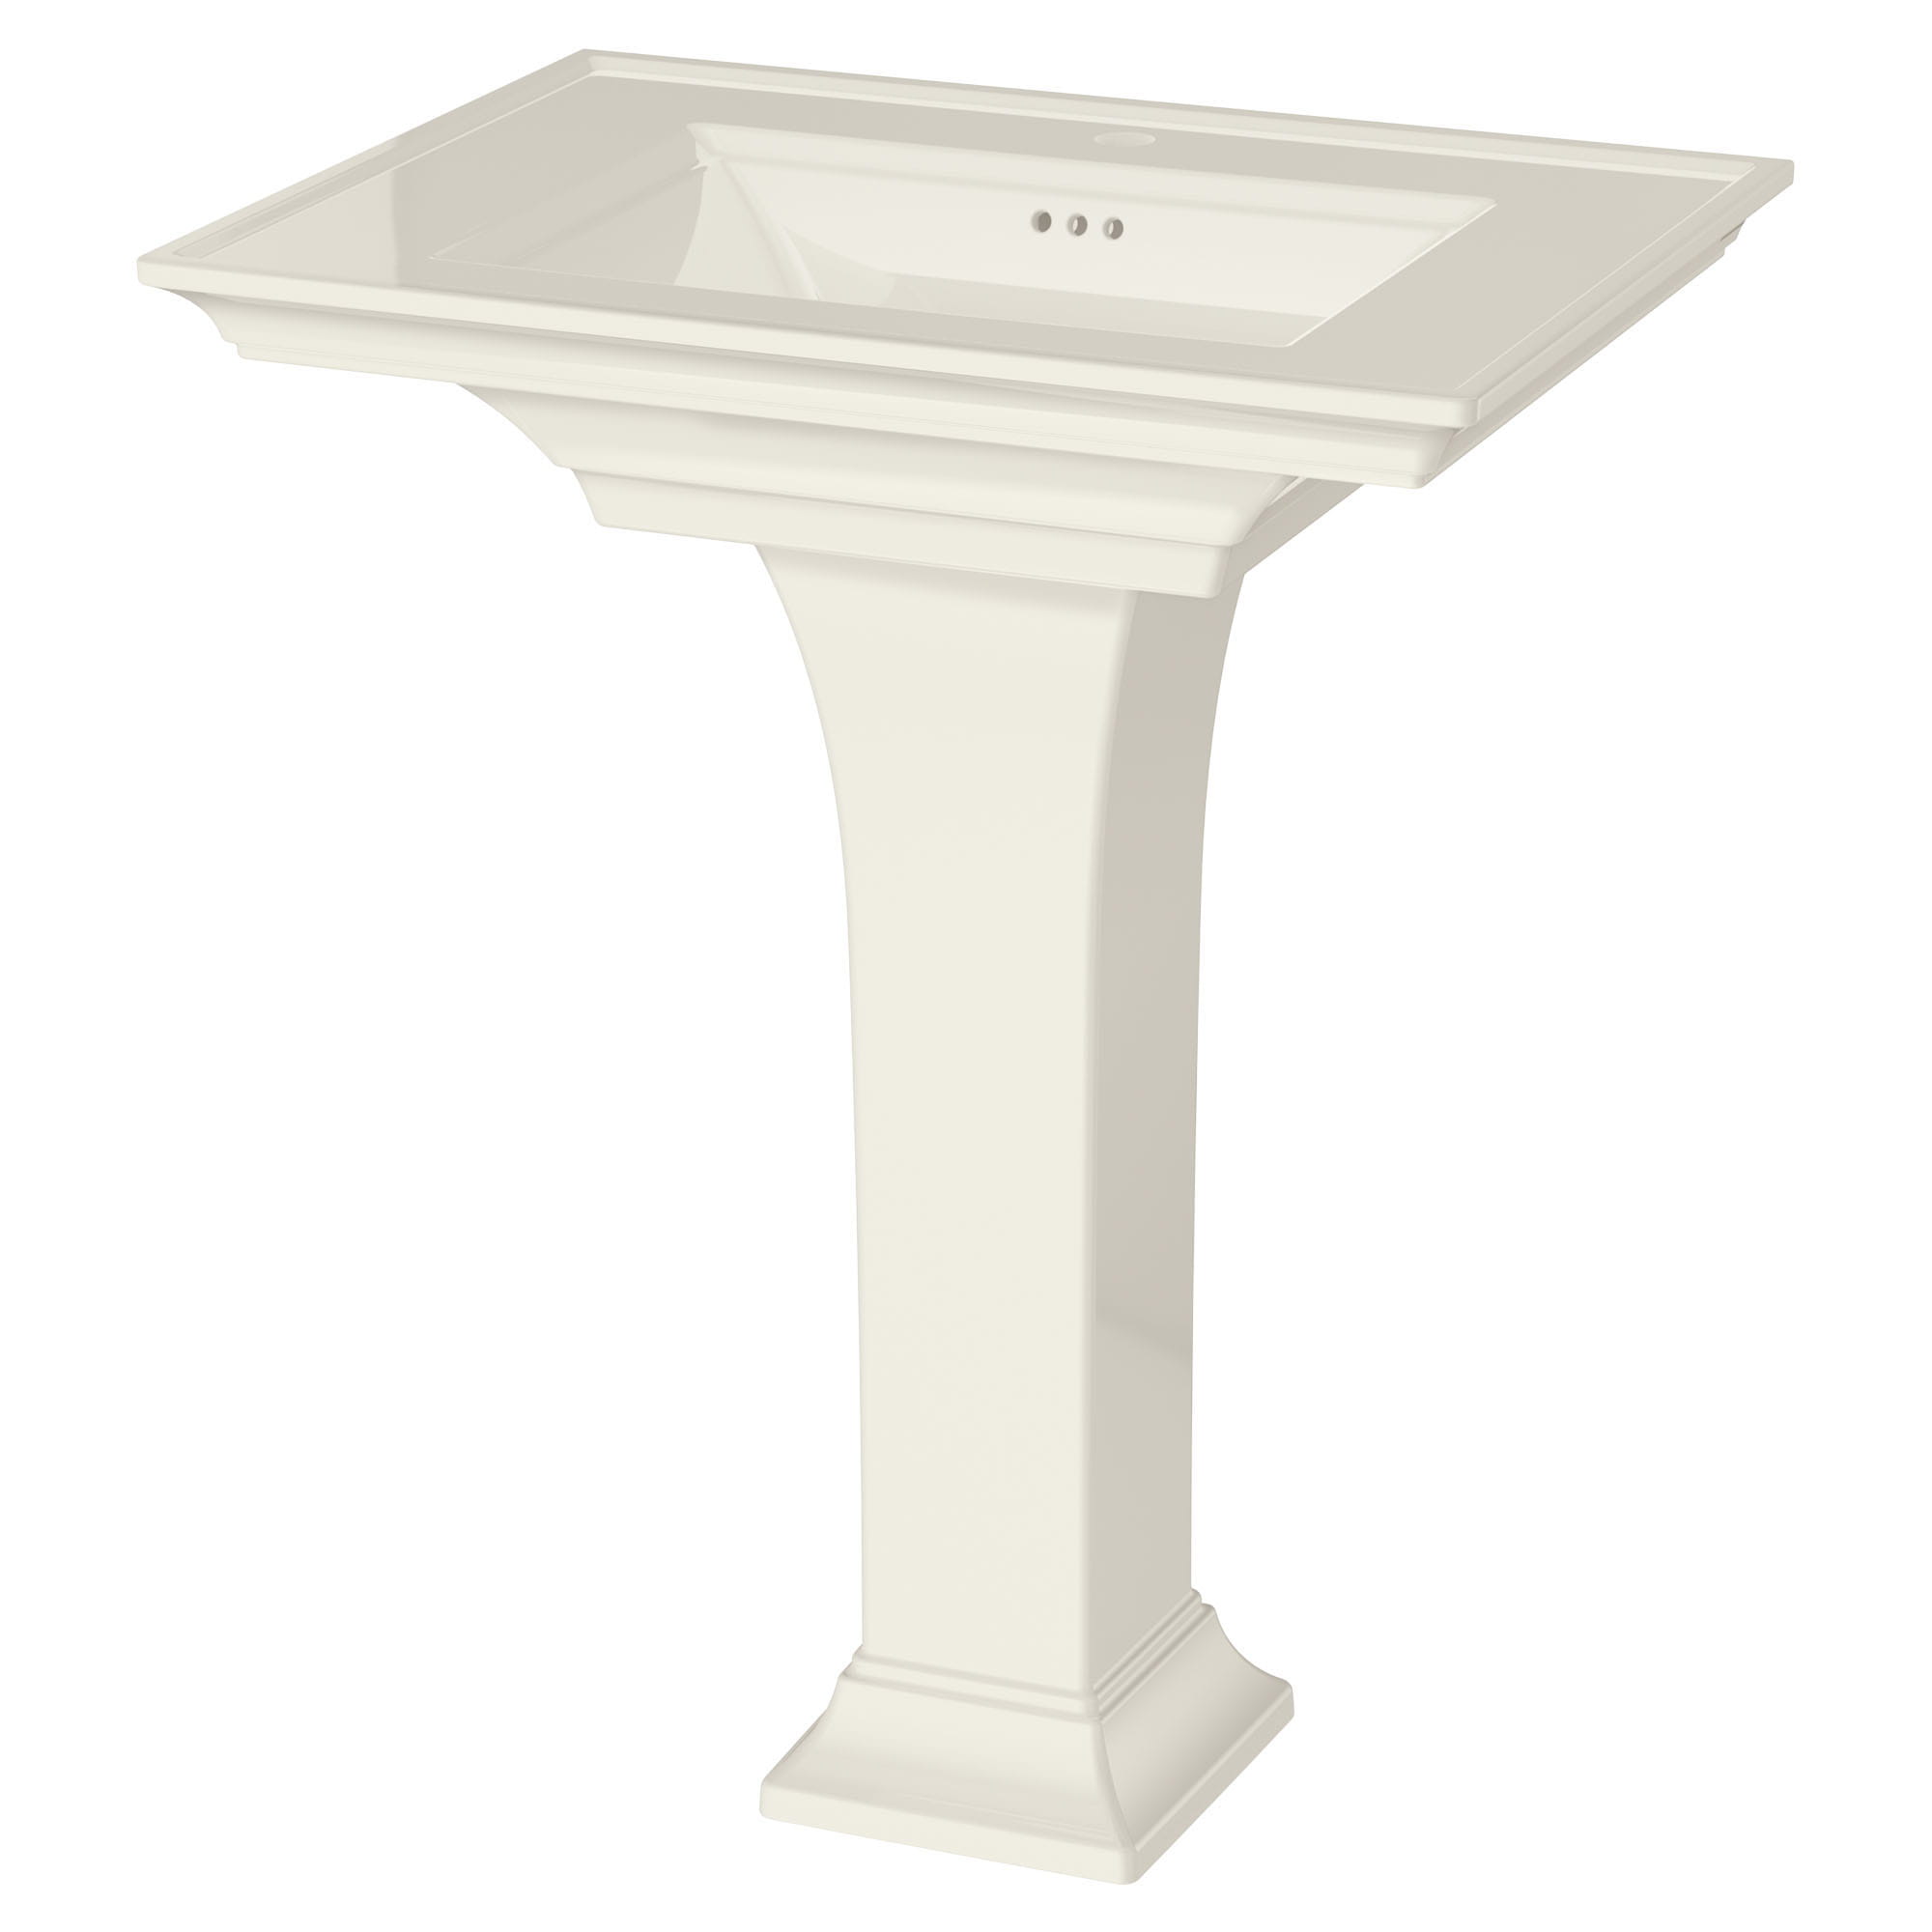 Town Square® S Center Hole Only Pedestal Sink Top and Leg Combination